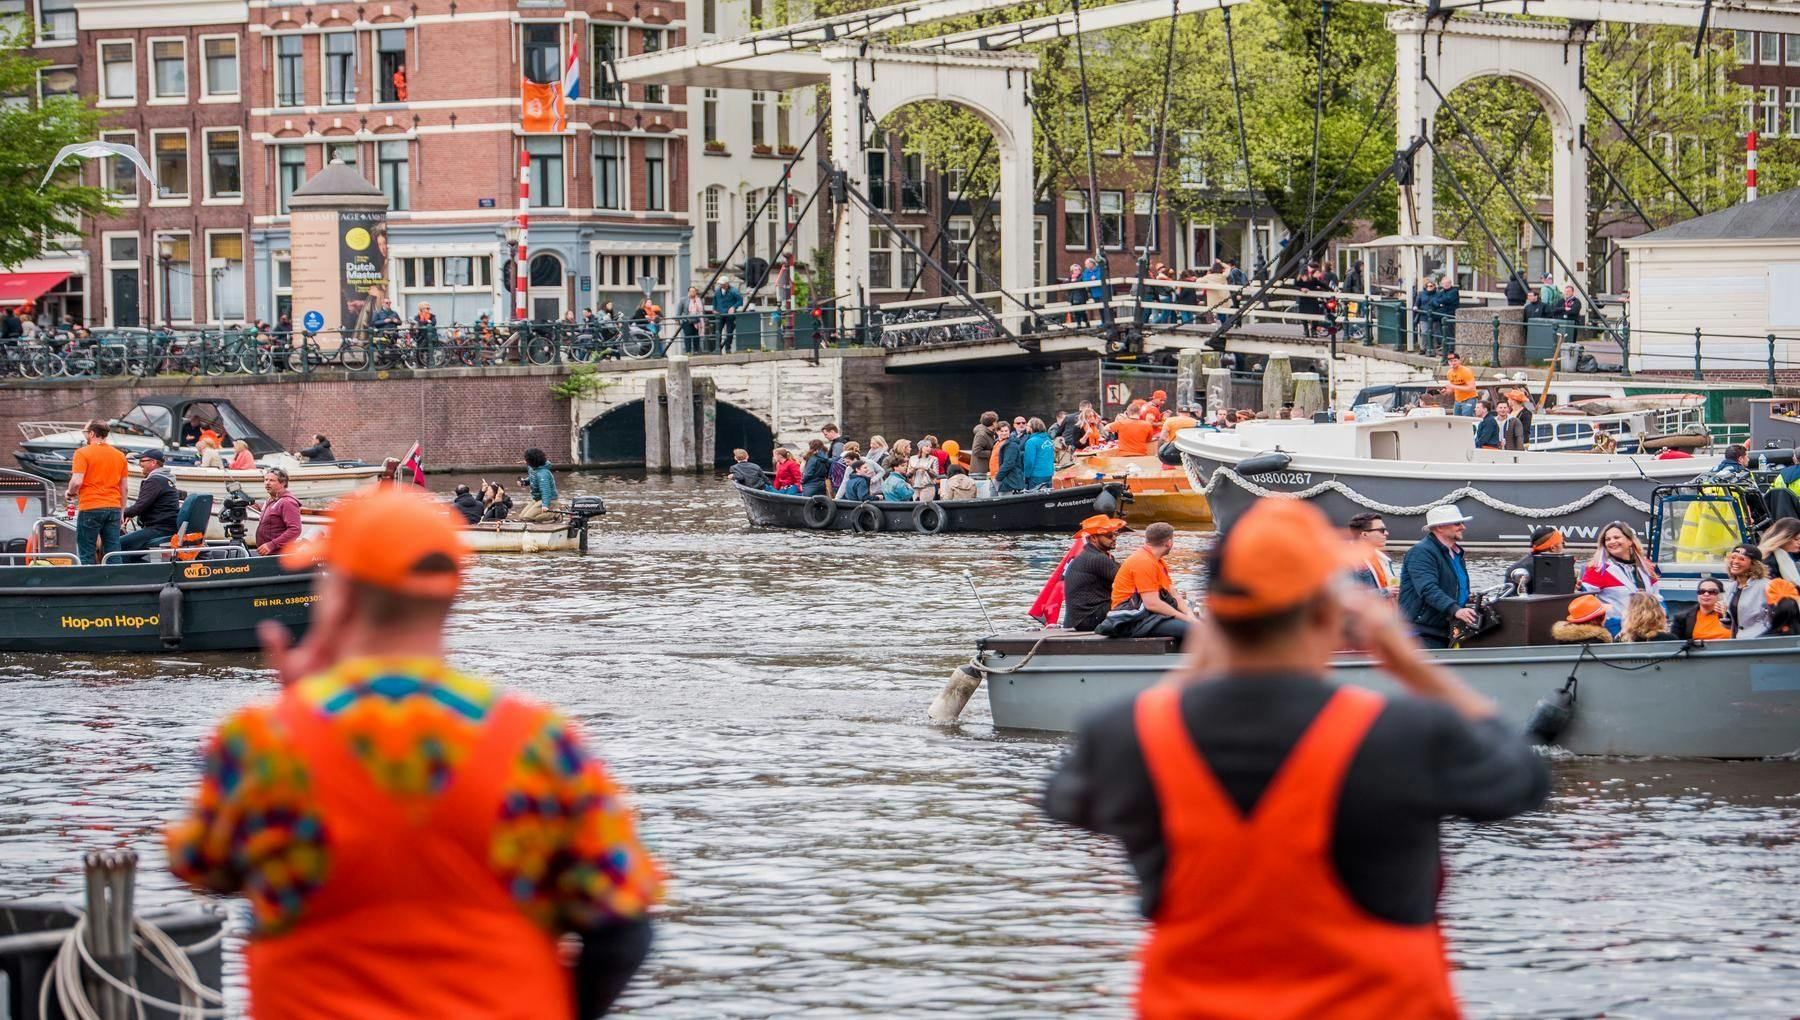 Koningsdag or King's Day is a national holiday in the Kingdom of the Netherlands. Celebrated on 27 April, the date marks the birth of King Willem-Alexander. 

Celebrations: Partying, wearing orange costumes,  and traditional local gatherings.